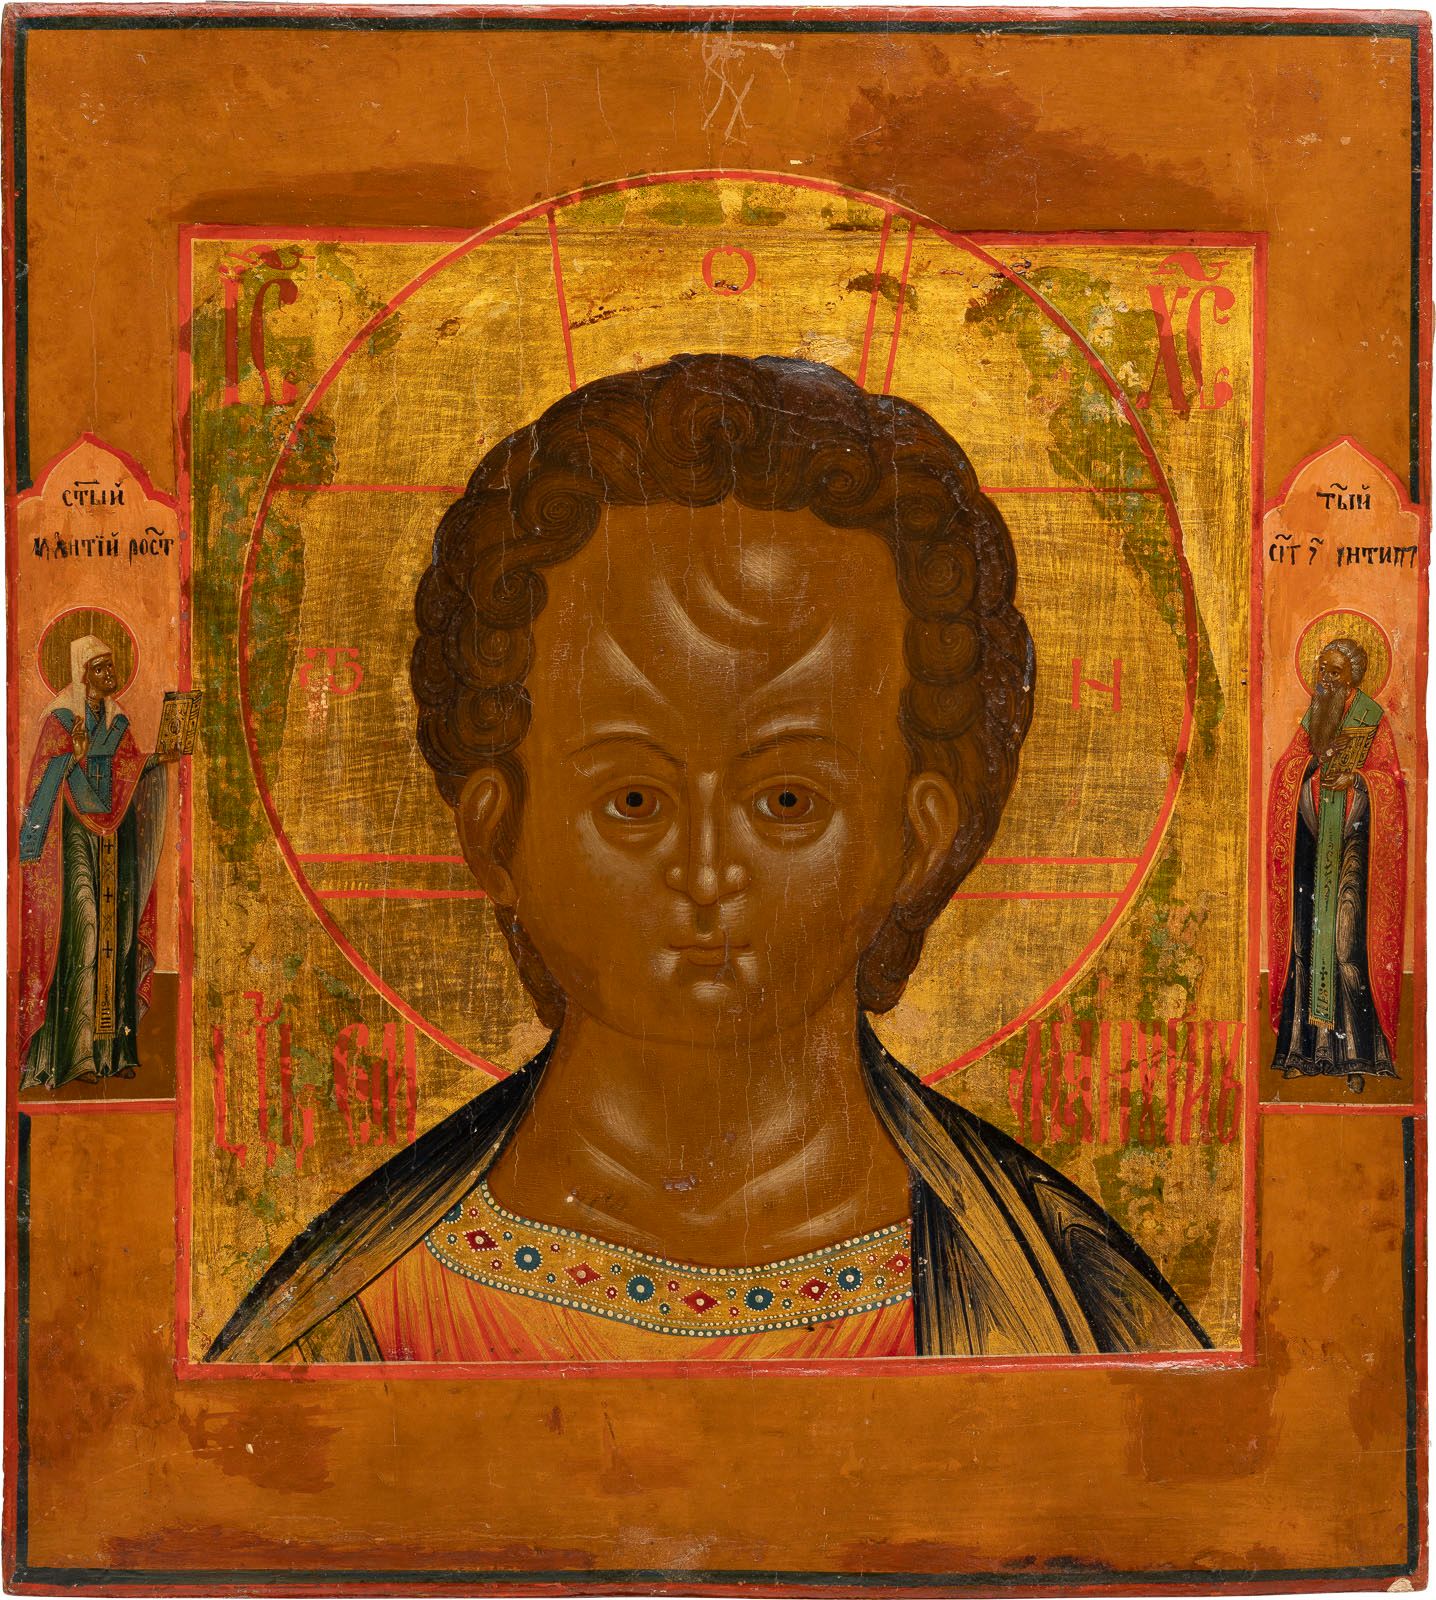 AN ICON SHOWING CHRIST EMMANUEL FROM A DEISIS ICONA CHE MOSTRA CRISTO EMMANUELE &hellip;